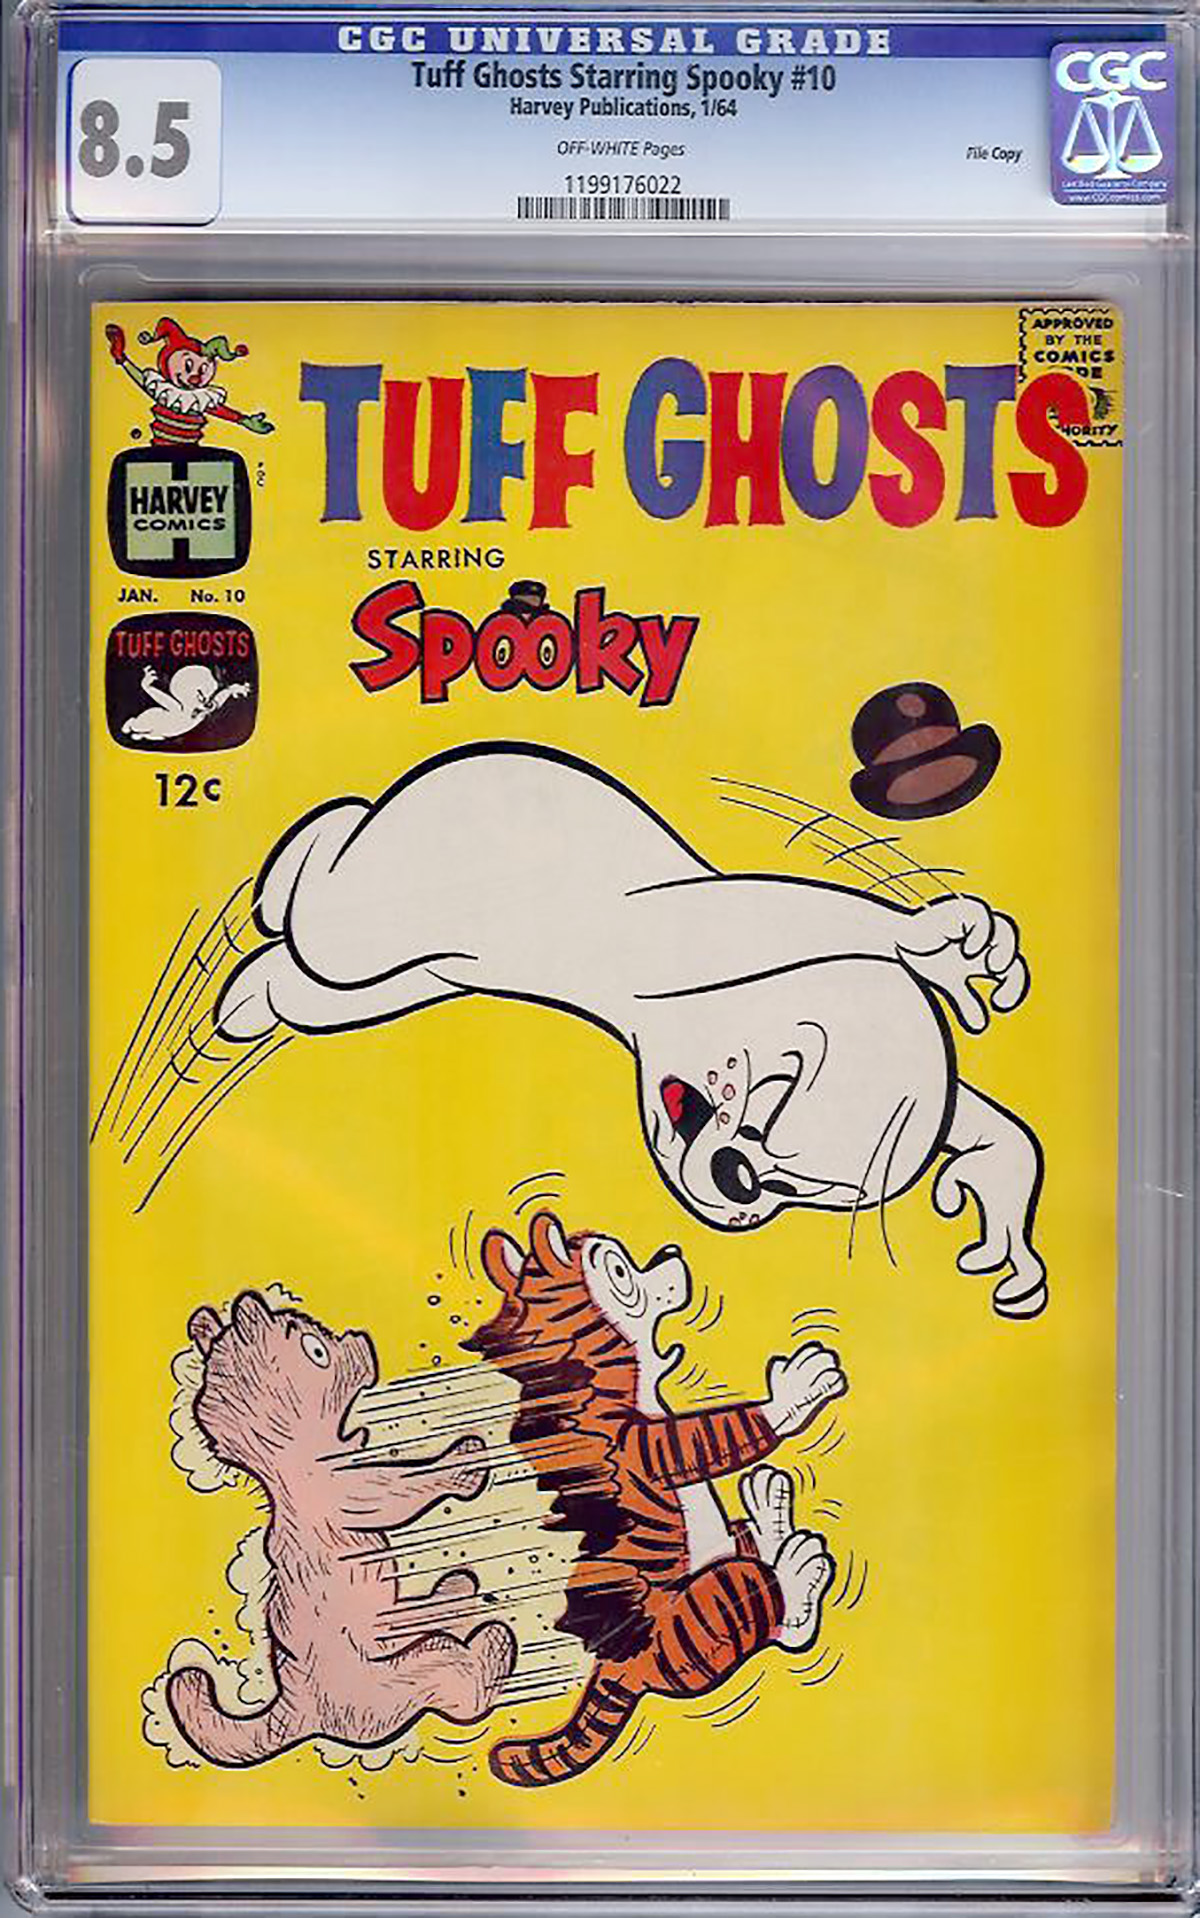 Tuff Ghosts Starring Spooky #10 CGC 8.5 ow File Copy